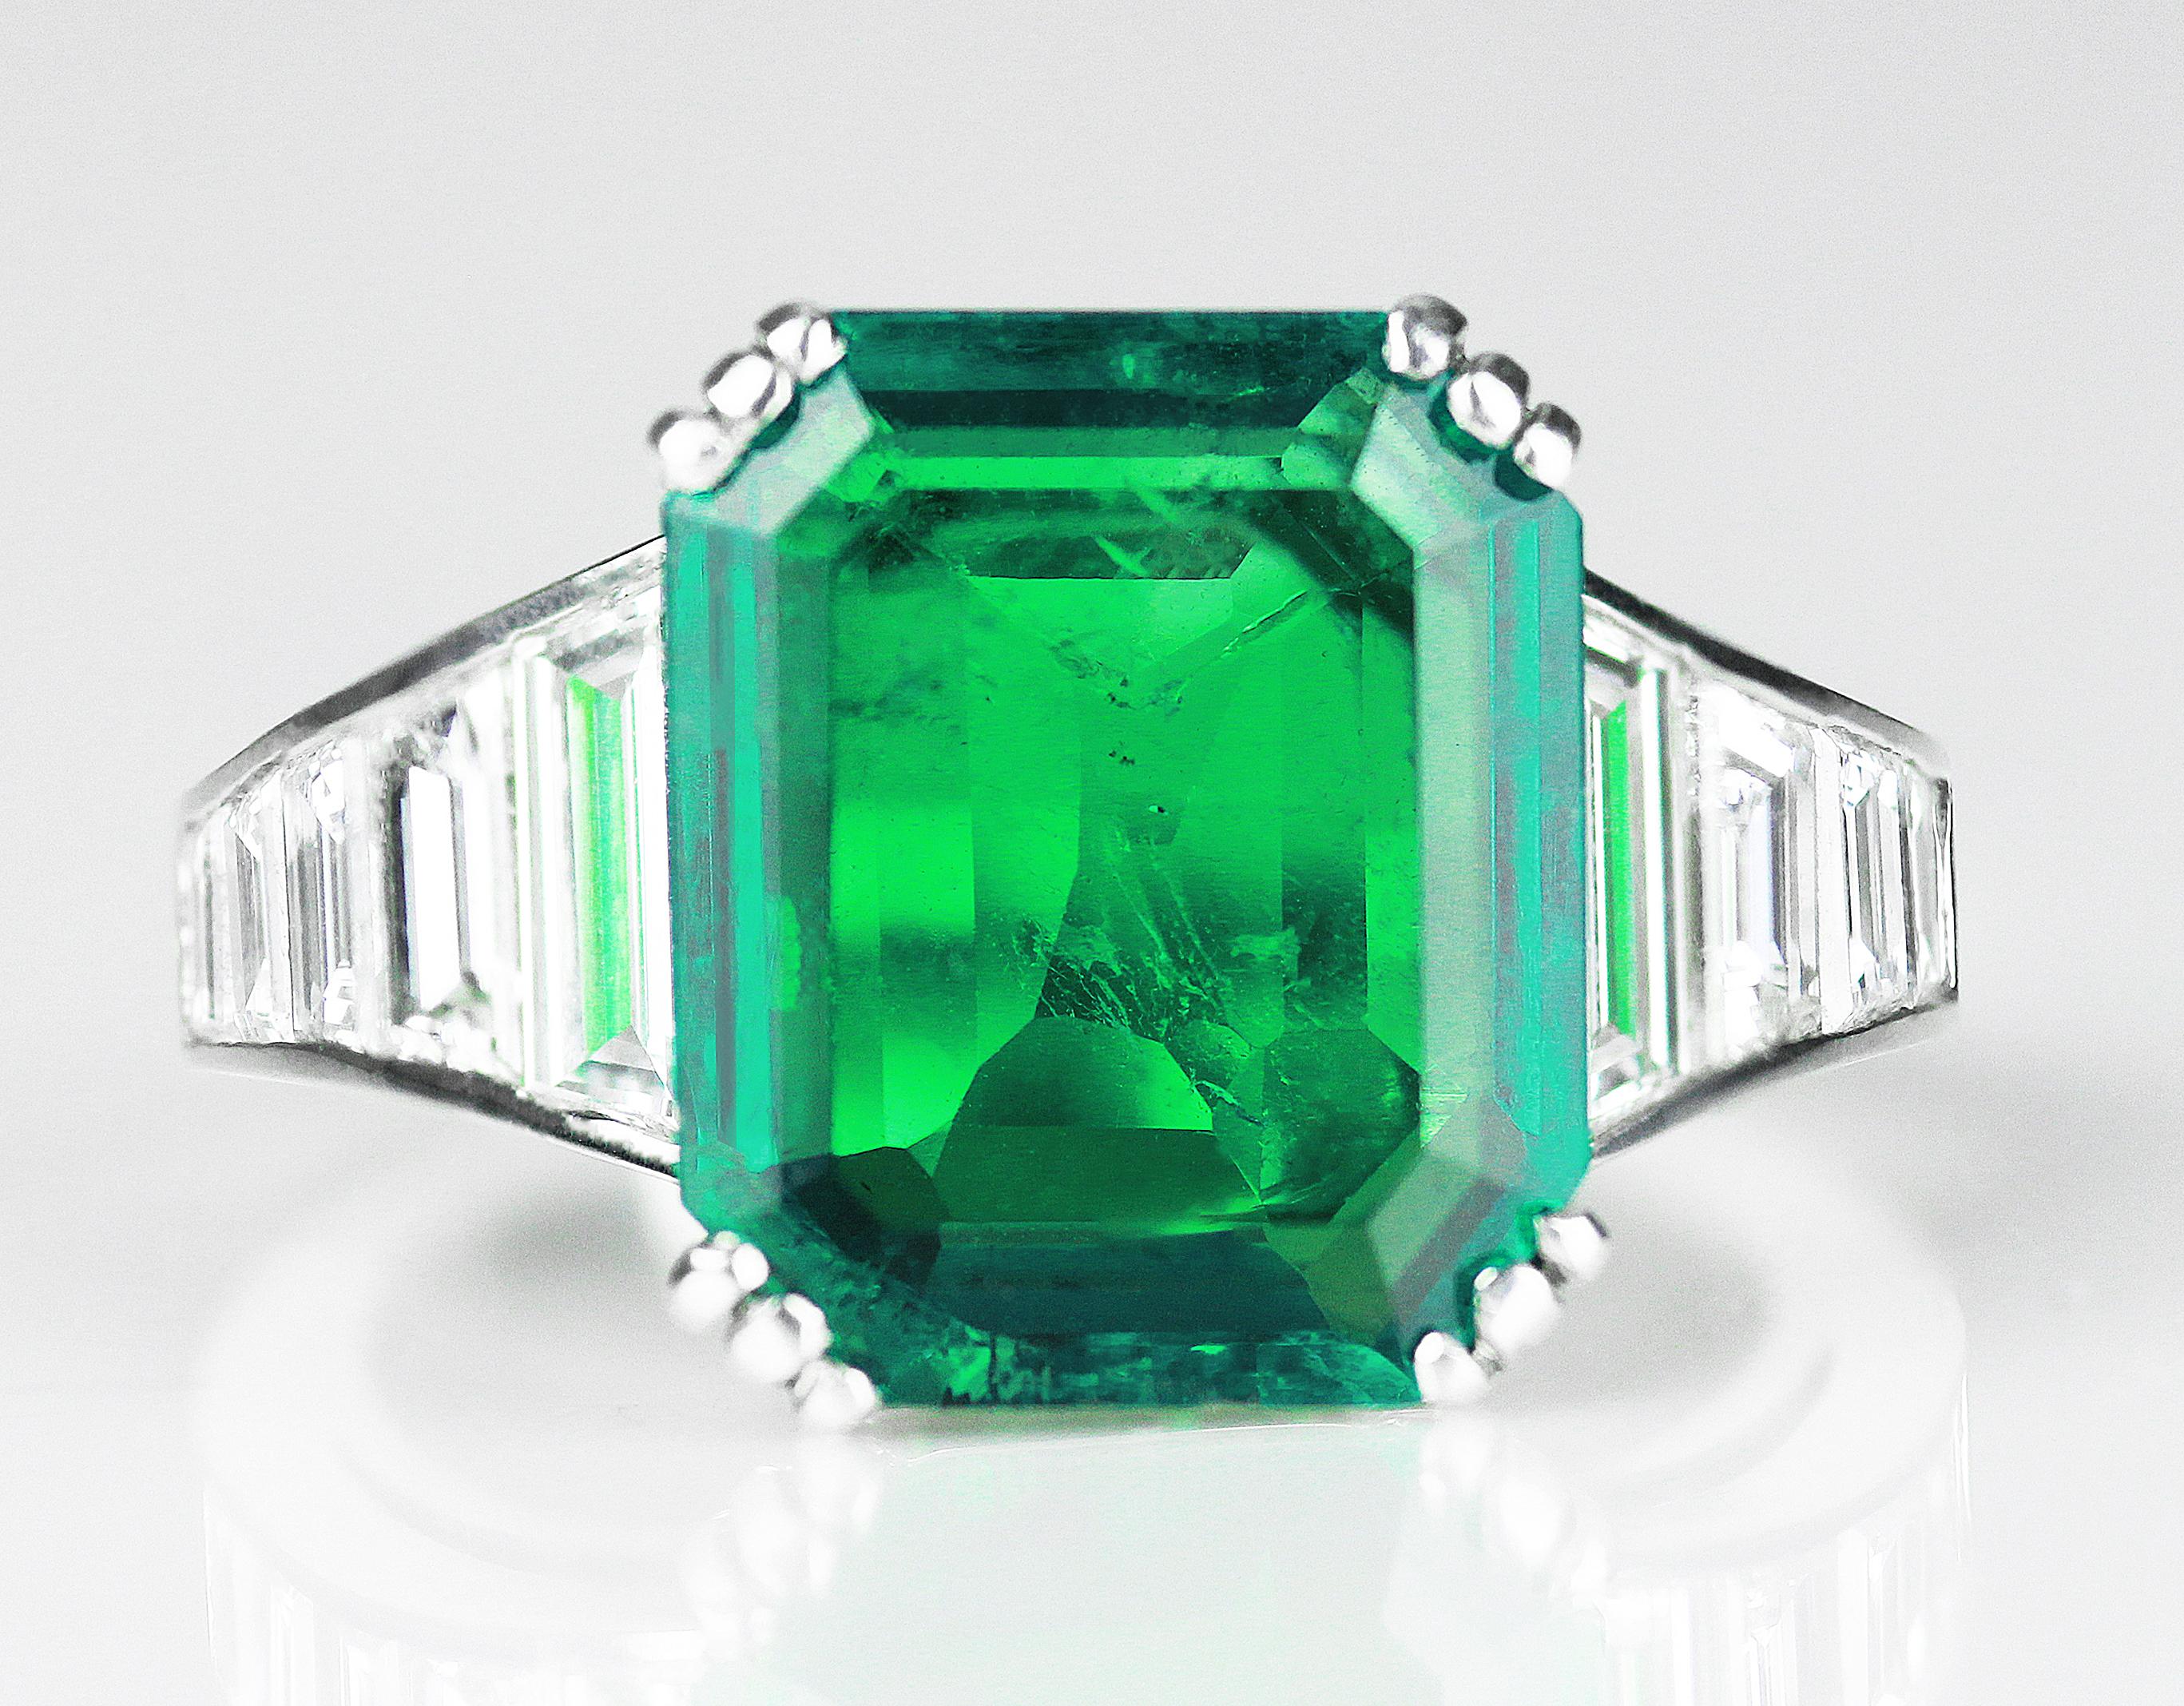 This stunning piece is a 4.09 ct  emerald & diamond in platinum ring formatting of a hexagon emerald, a deep royal green shade placed on a classic band with glistening baguette cut diamonds of graduating to the sides. The mysterious depth of the